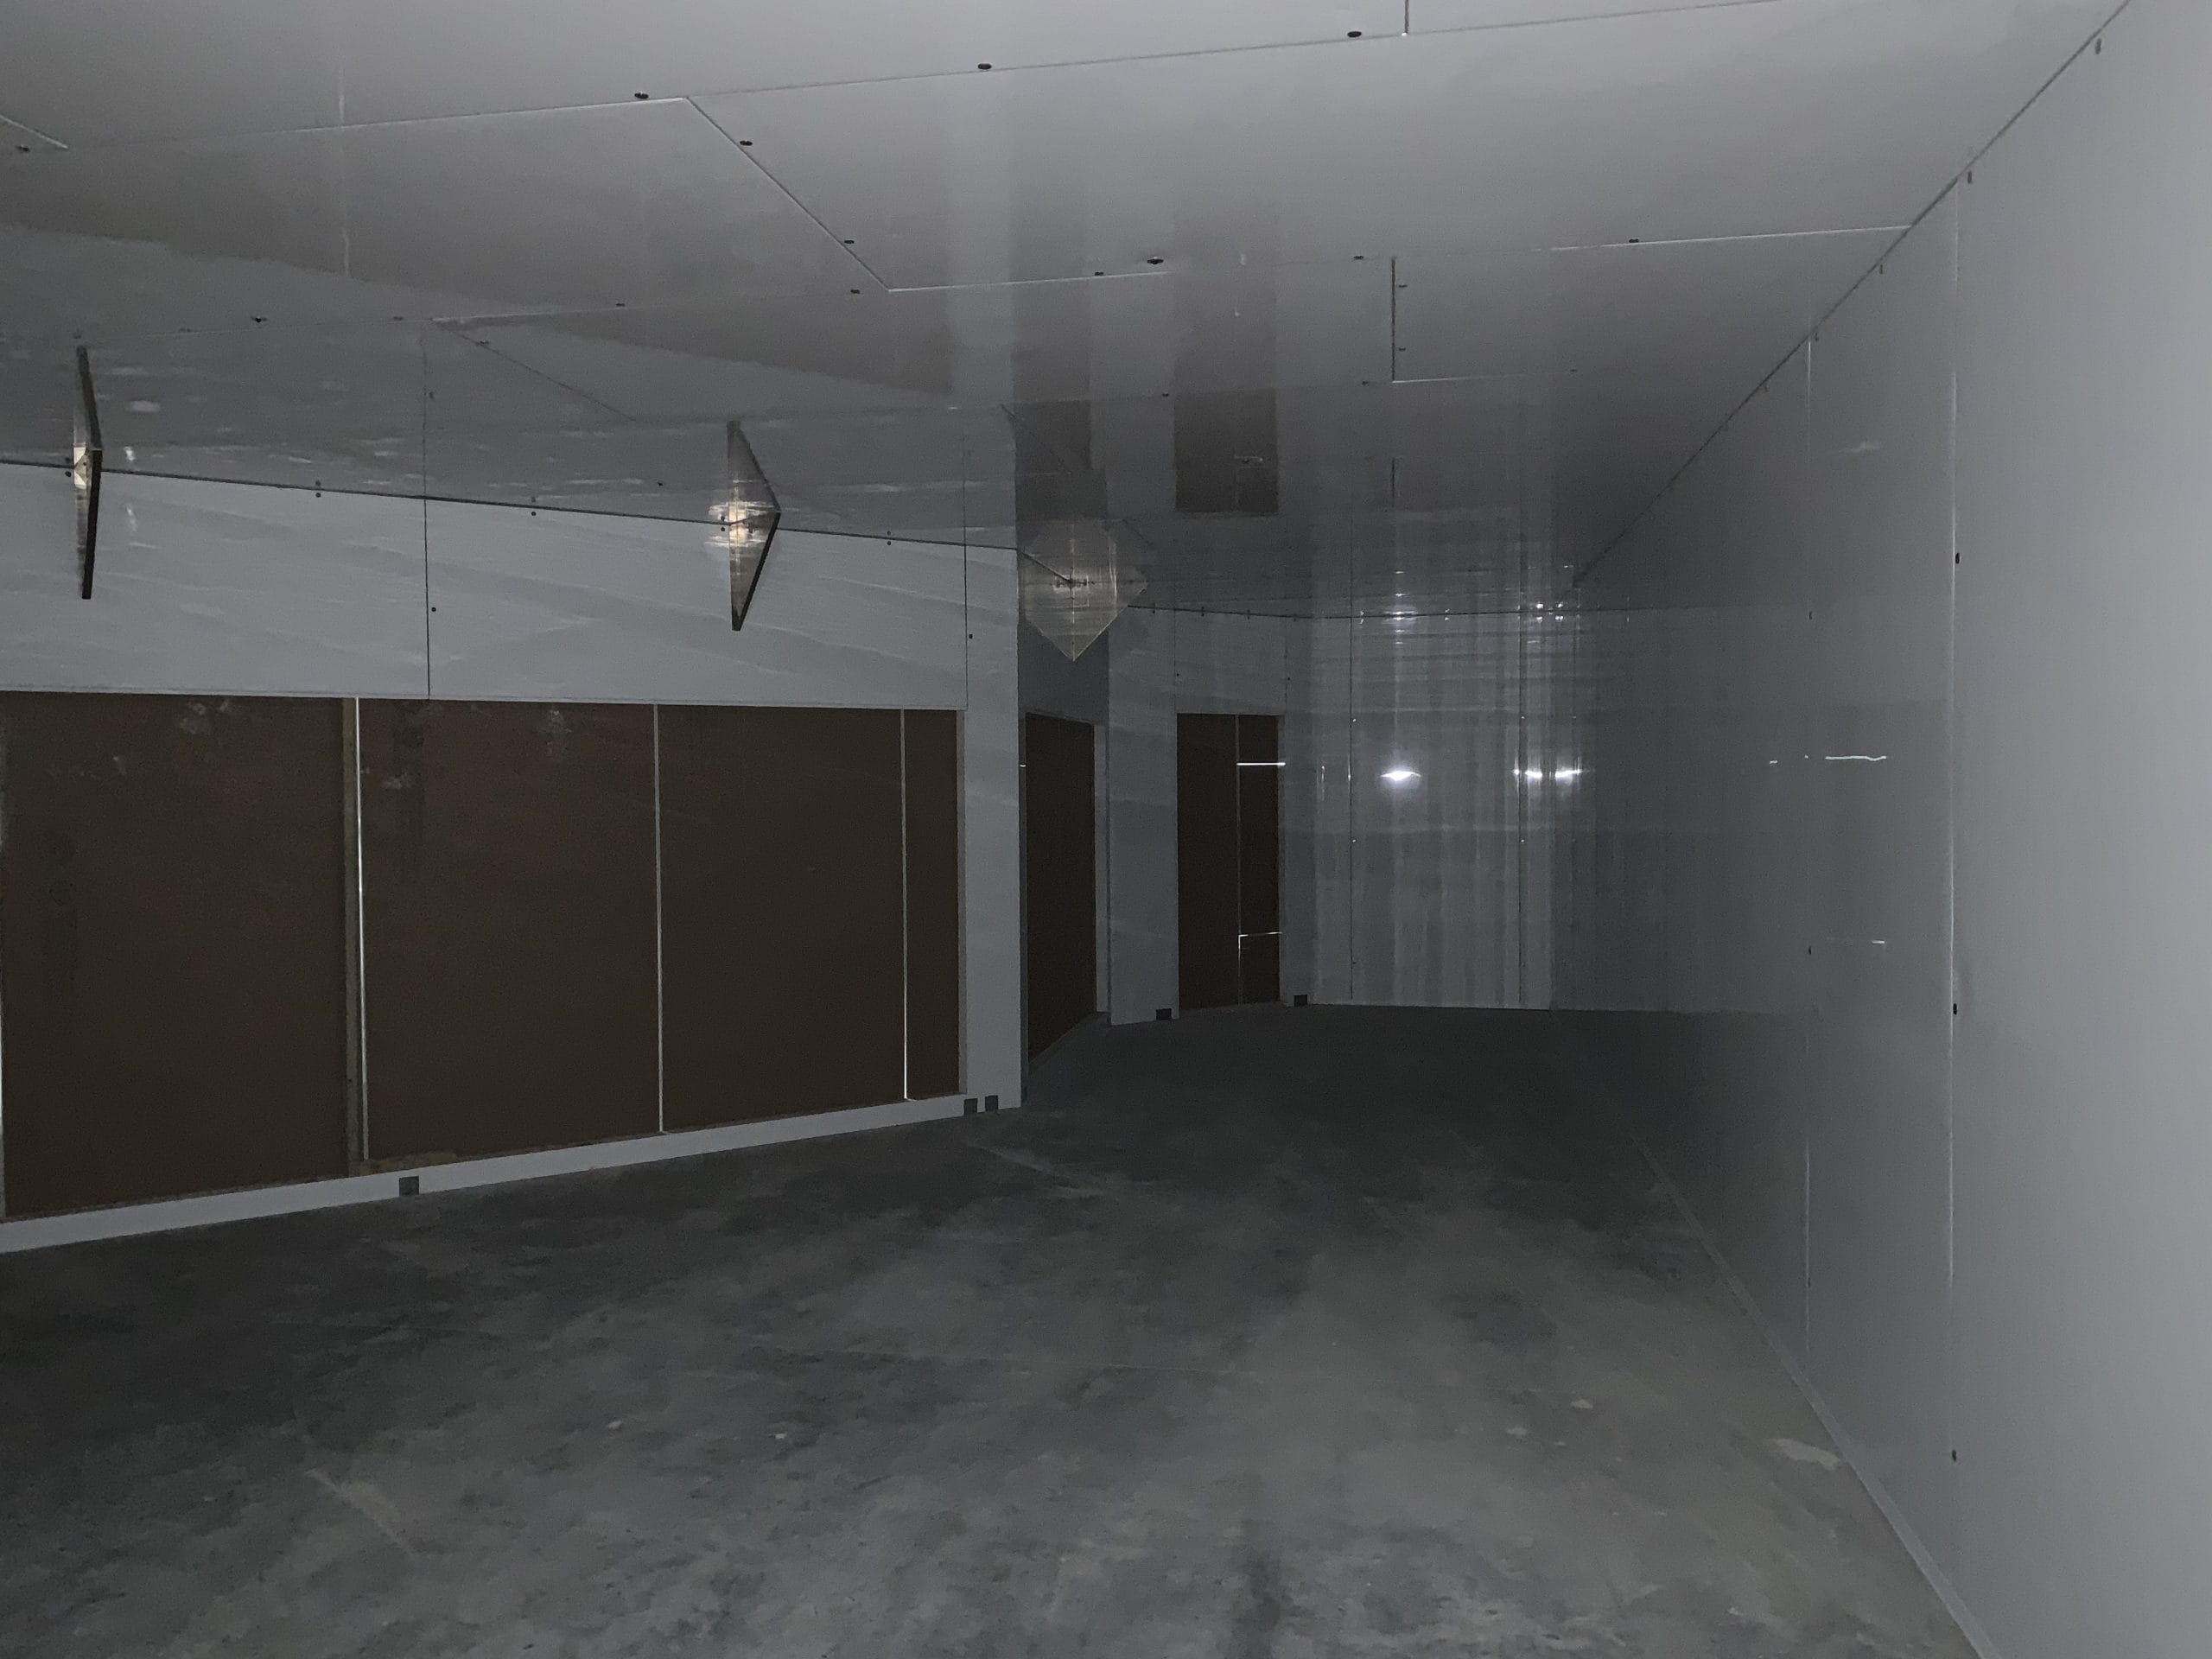 Inside of store during construction